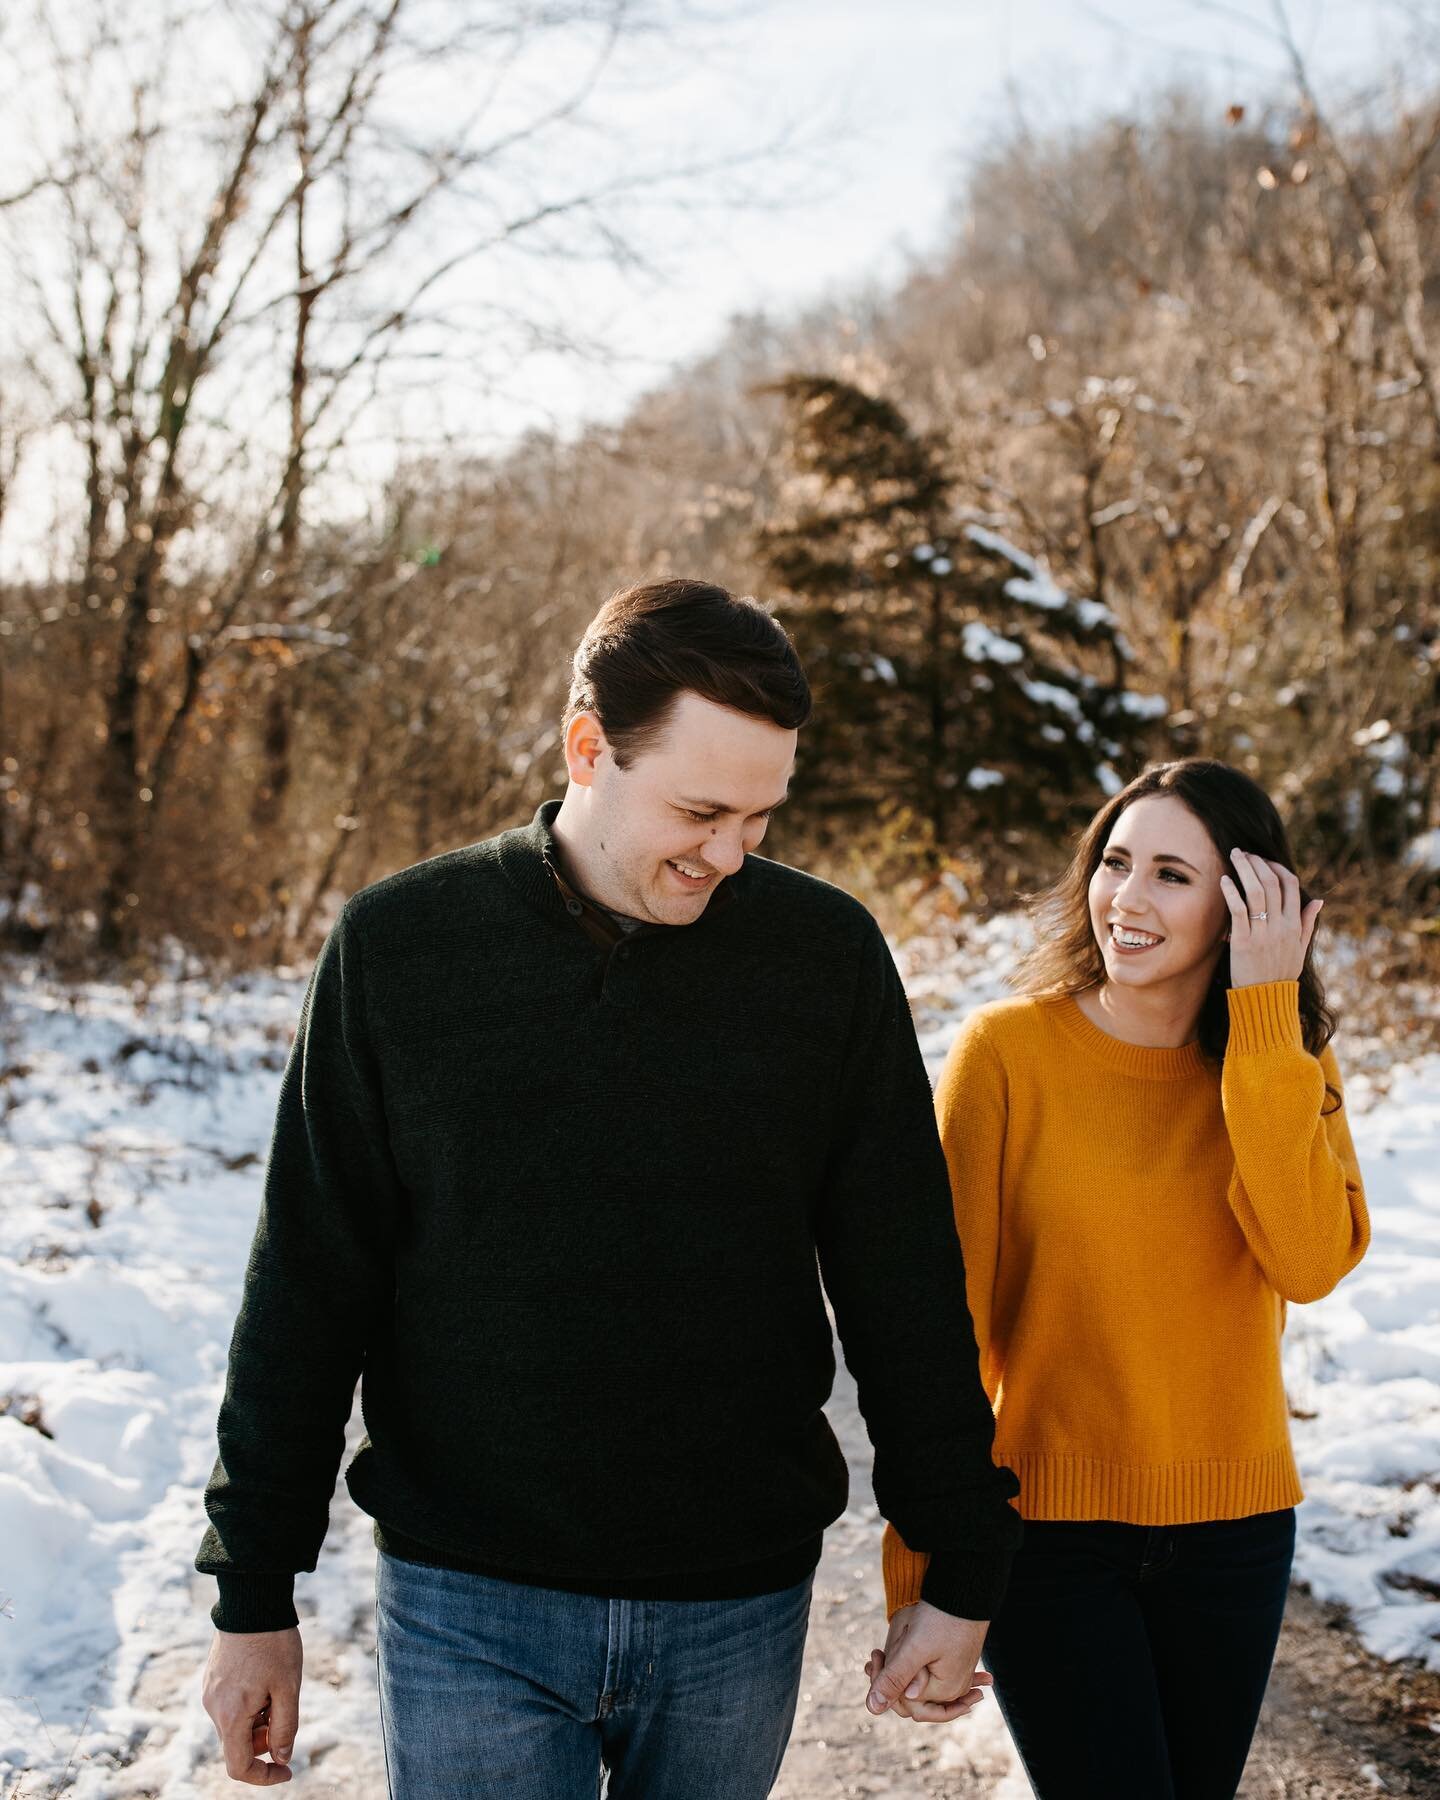 logan + summer
&cap;
we had this session scheduled WAY before we knew it would snow. Logan and Summer ended up having the sweetest snowy engagement session!
&cap;
This job is even sweeter when I get to capture big milestones for sweet friends like th